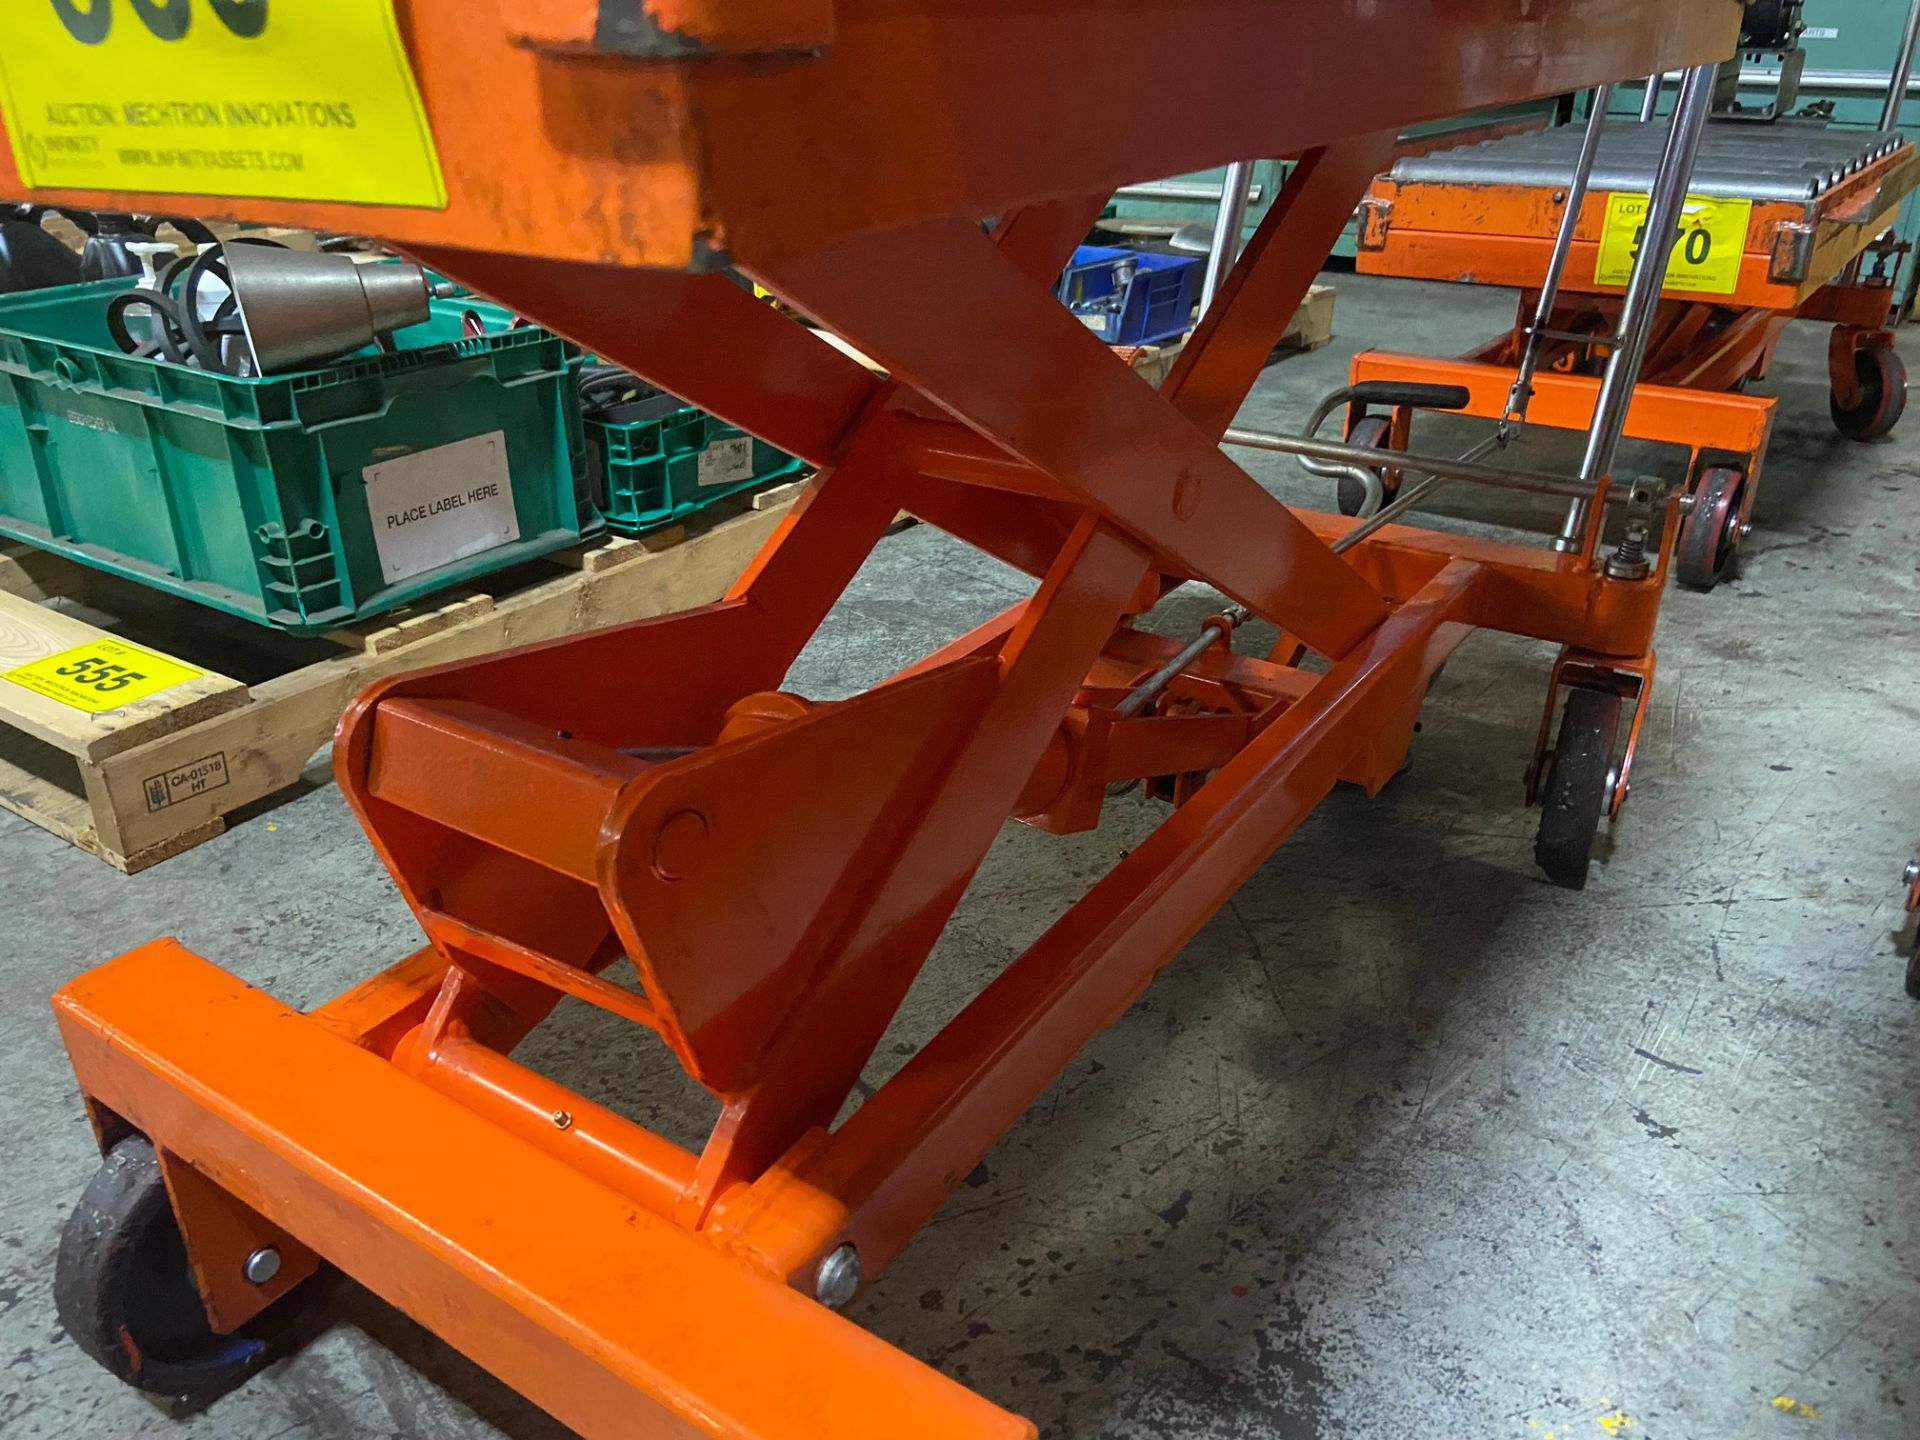 PORTABLE DIE LIFT TABLE ON CASTORS, 1650 LBS, C/W 19" X 39" ROLL TOP CONVEYOR & CABLE WINCH - Image 2 of 7